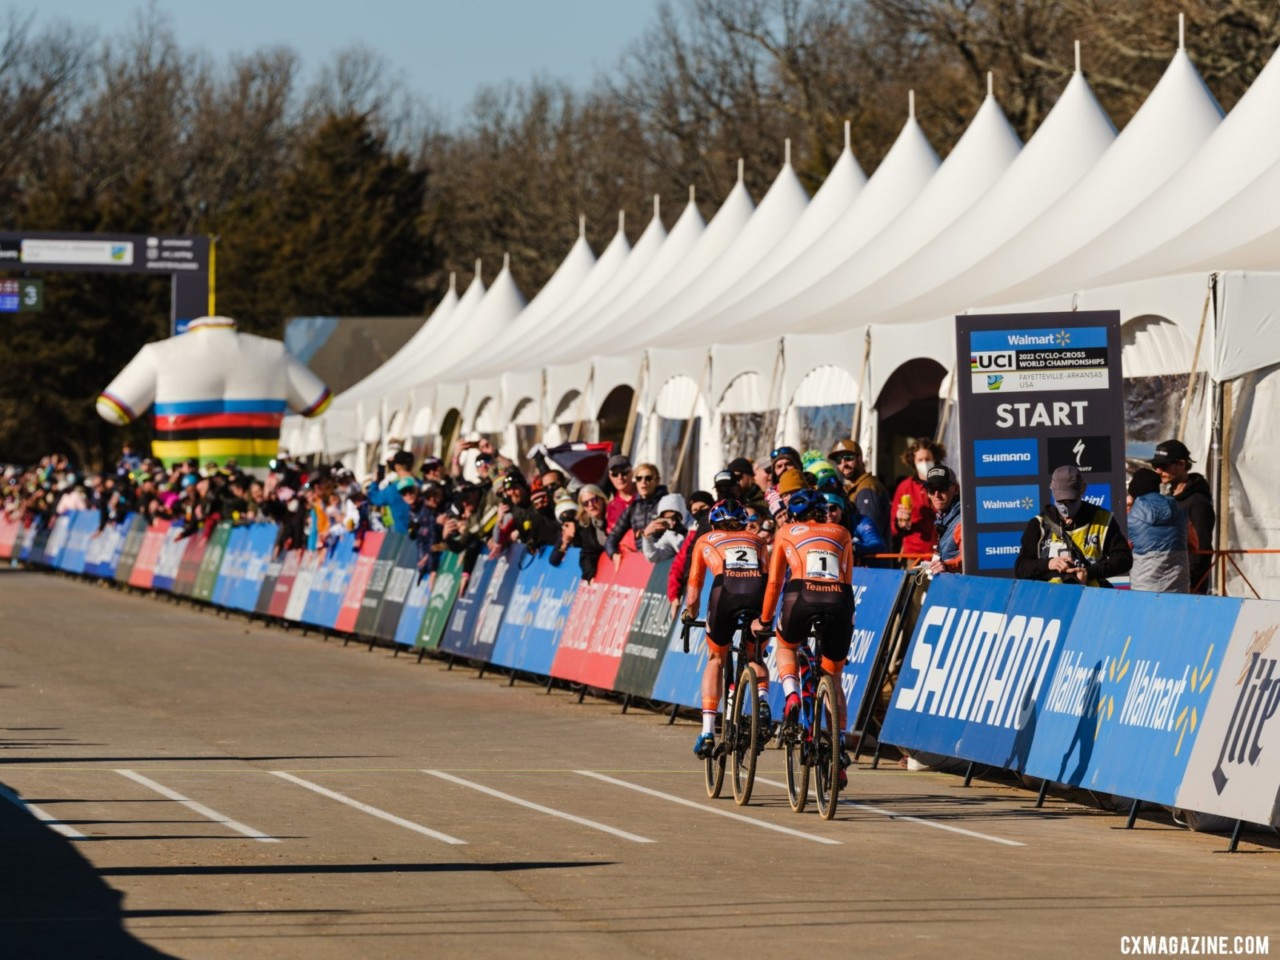 Marianne Vos leads Lucinda Brand down the finishing straight. Elite Women, 2022 Cyclocross World Championships, Fayetteville, Arkansas USA. © G. Gould / Cyclocross Magazine